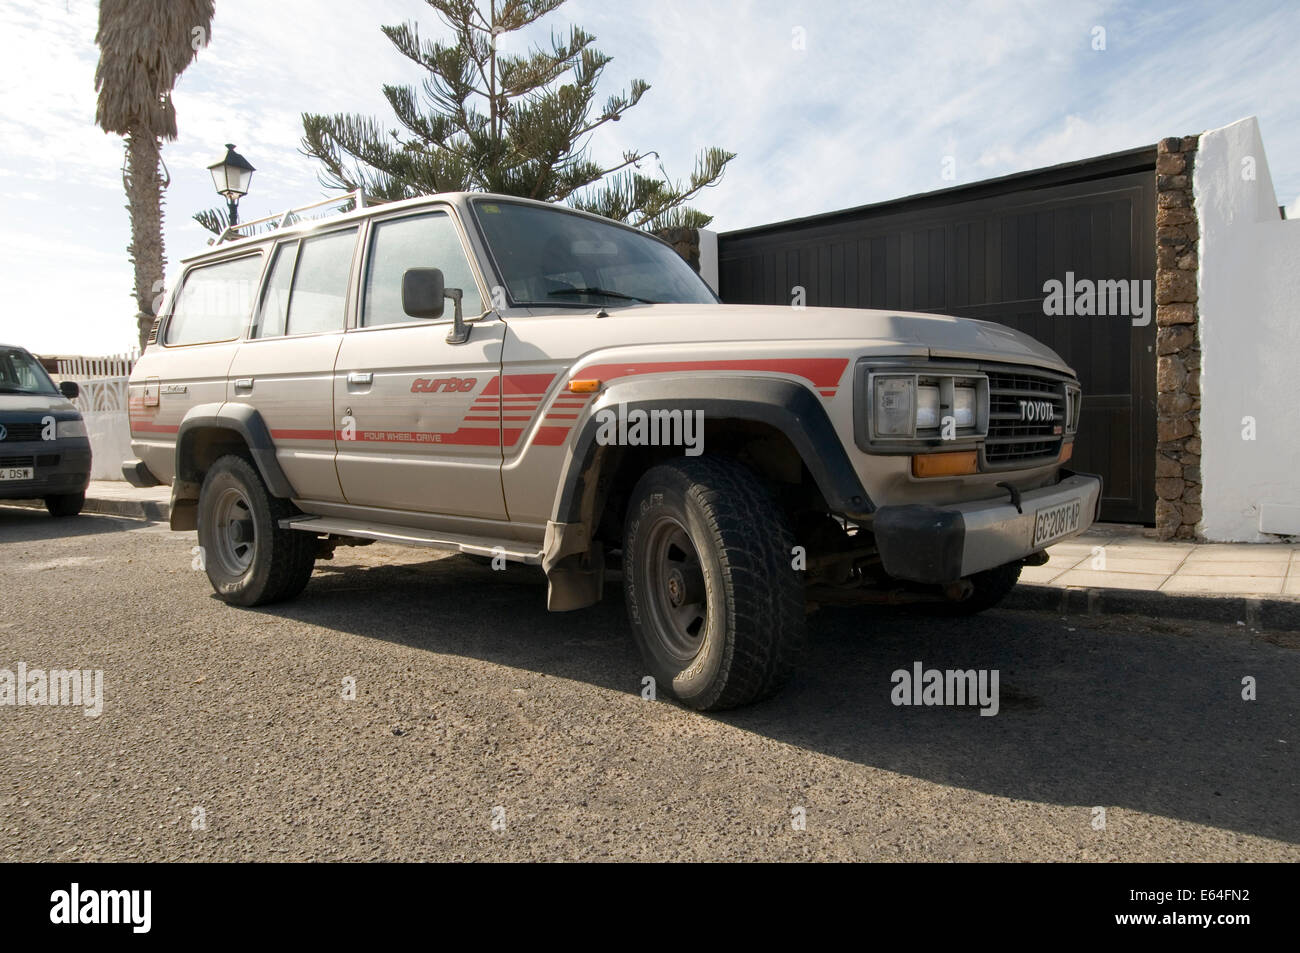 toyota land cruiser 4 by four 4X4 Japanese off road car suv suvs sports utility vehicle Stock Photo